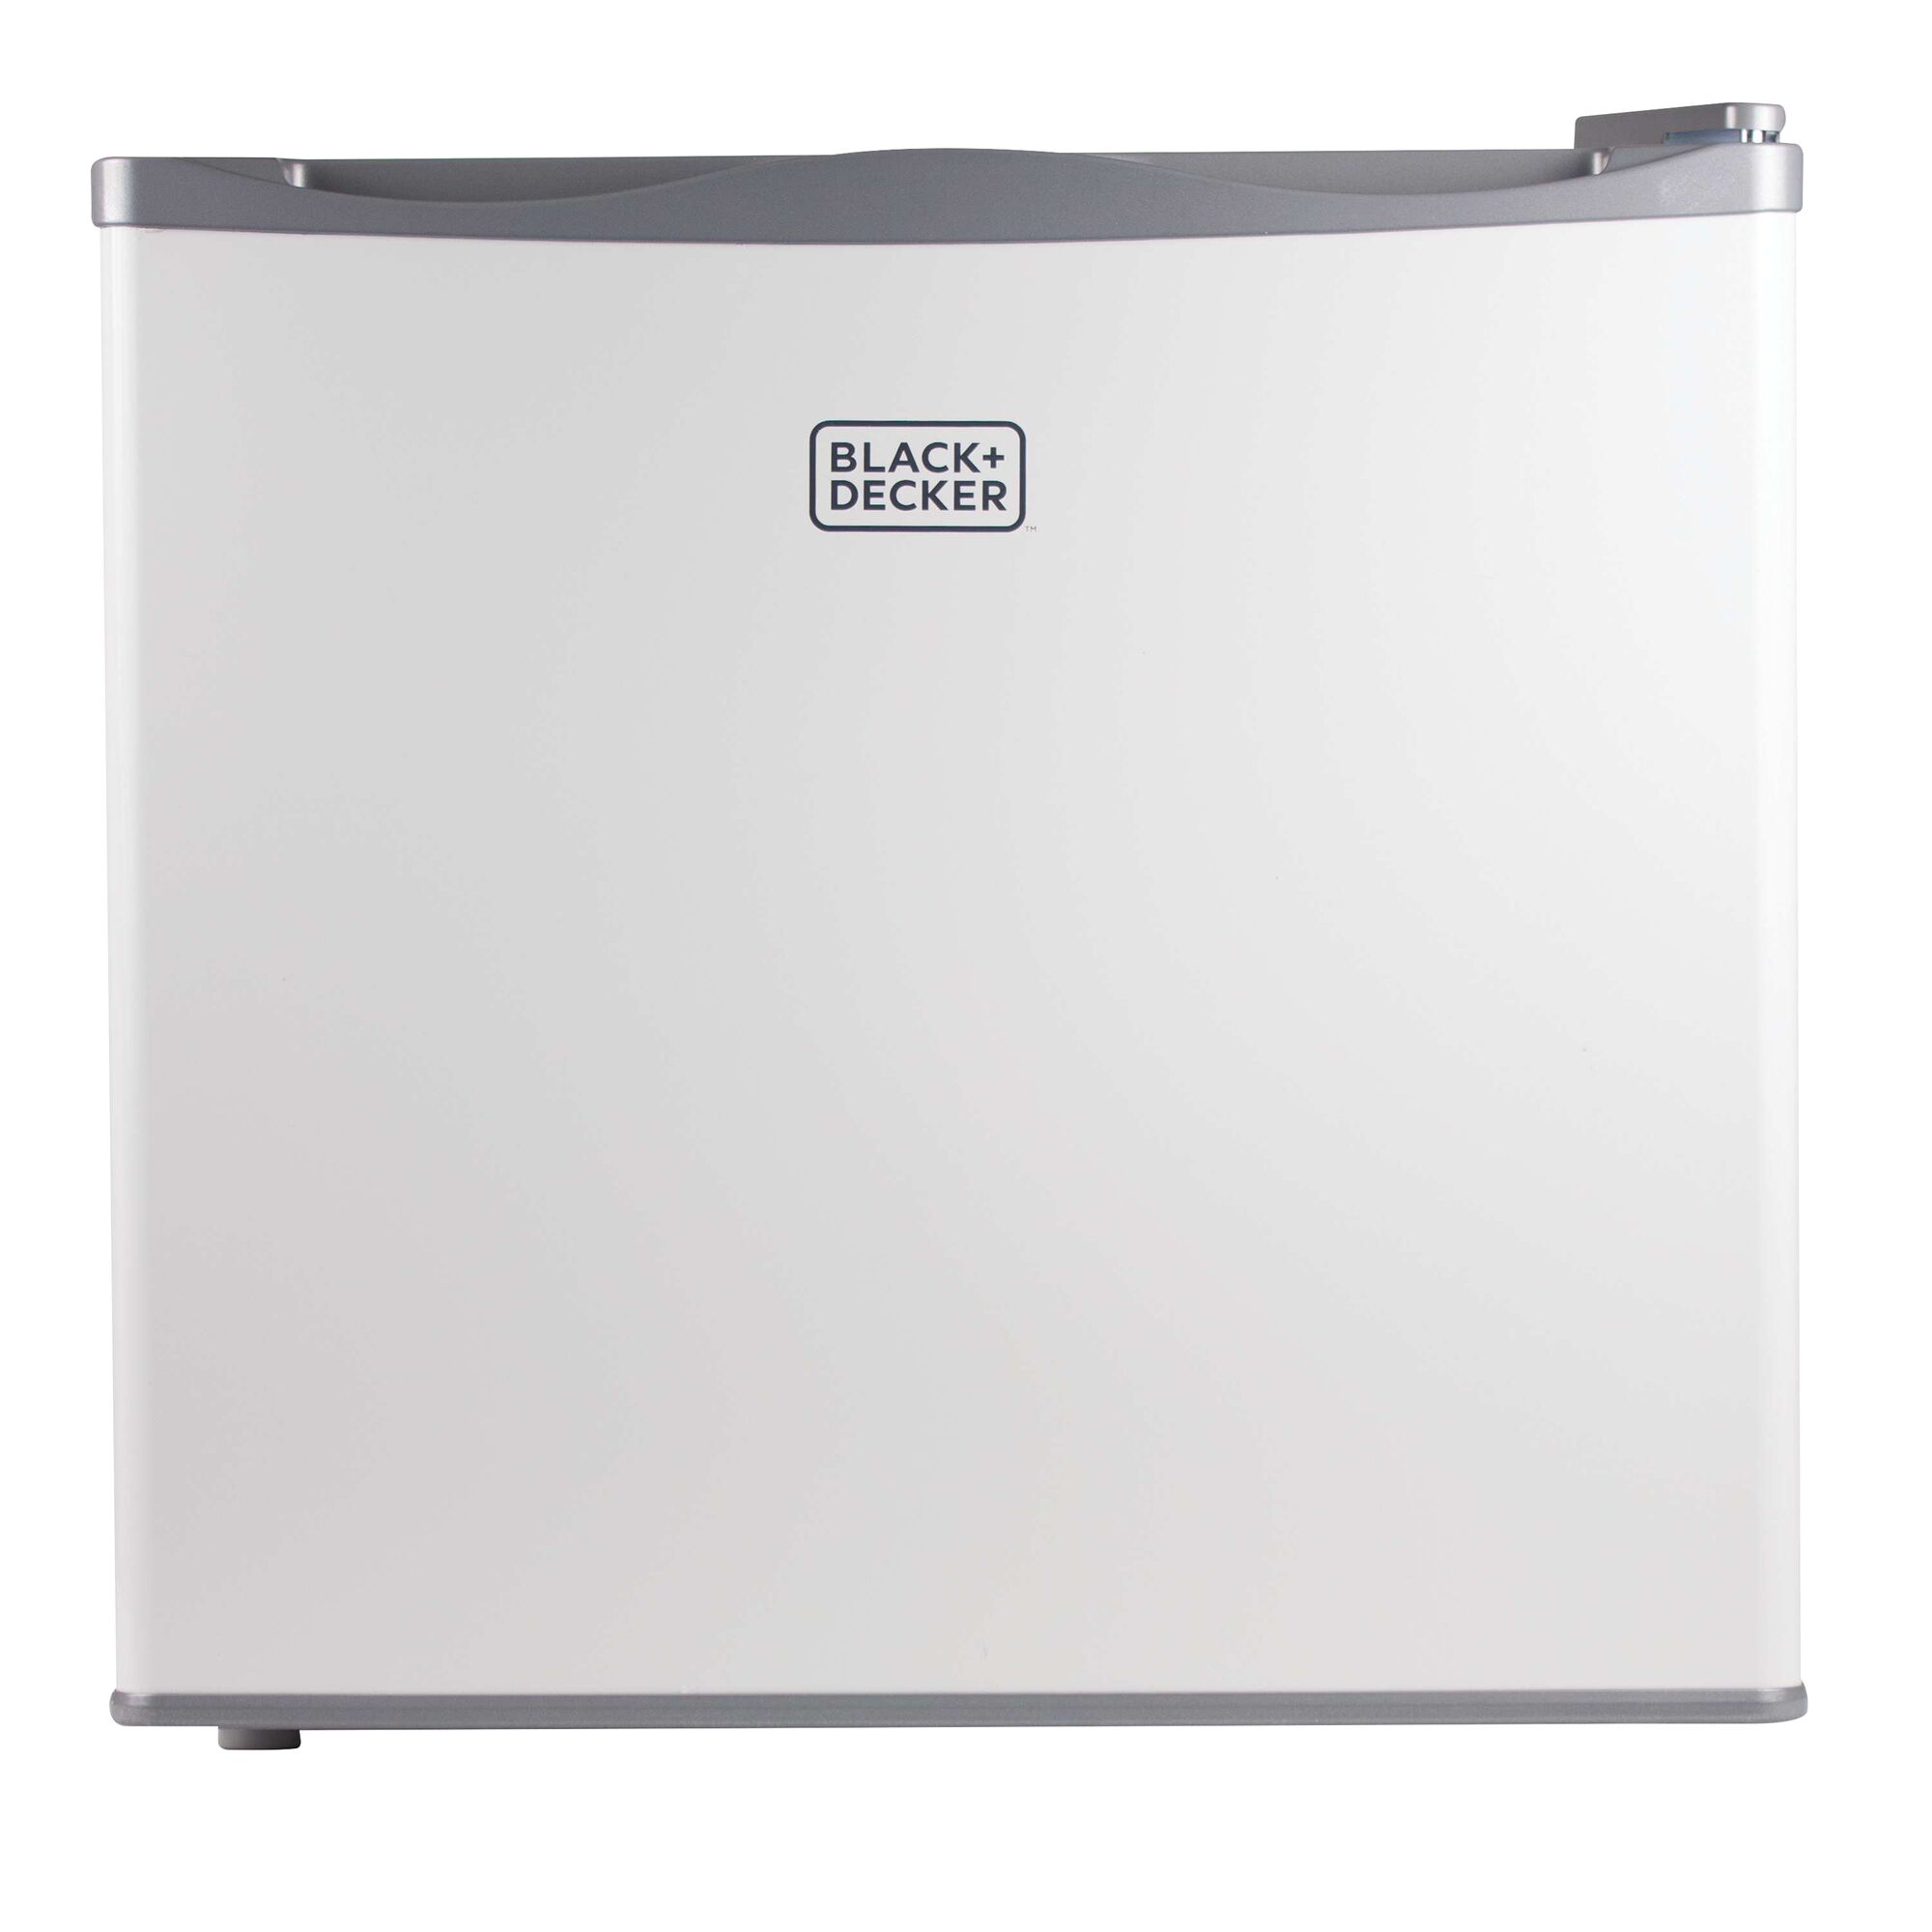 1.2 Cubic Foot Compact Upright Freezer.